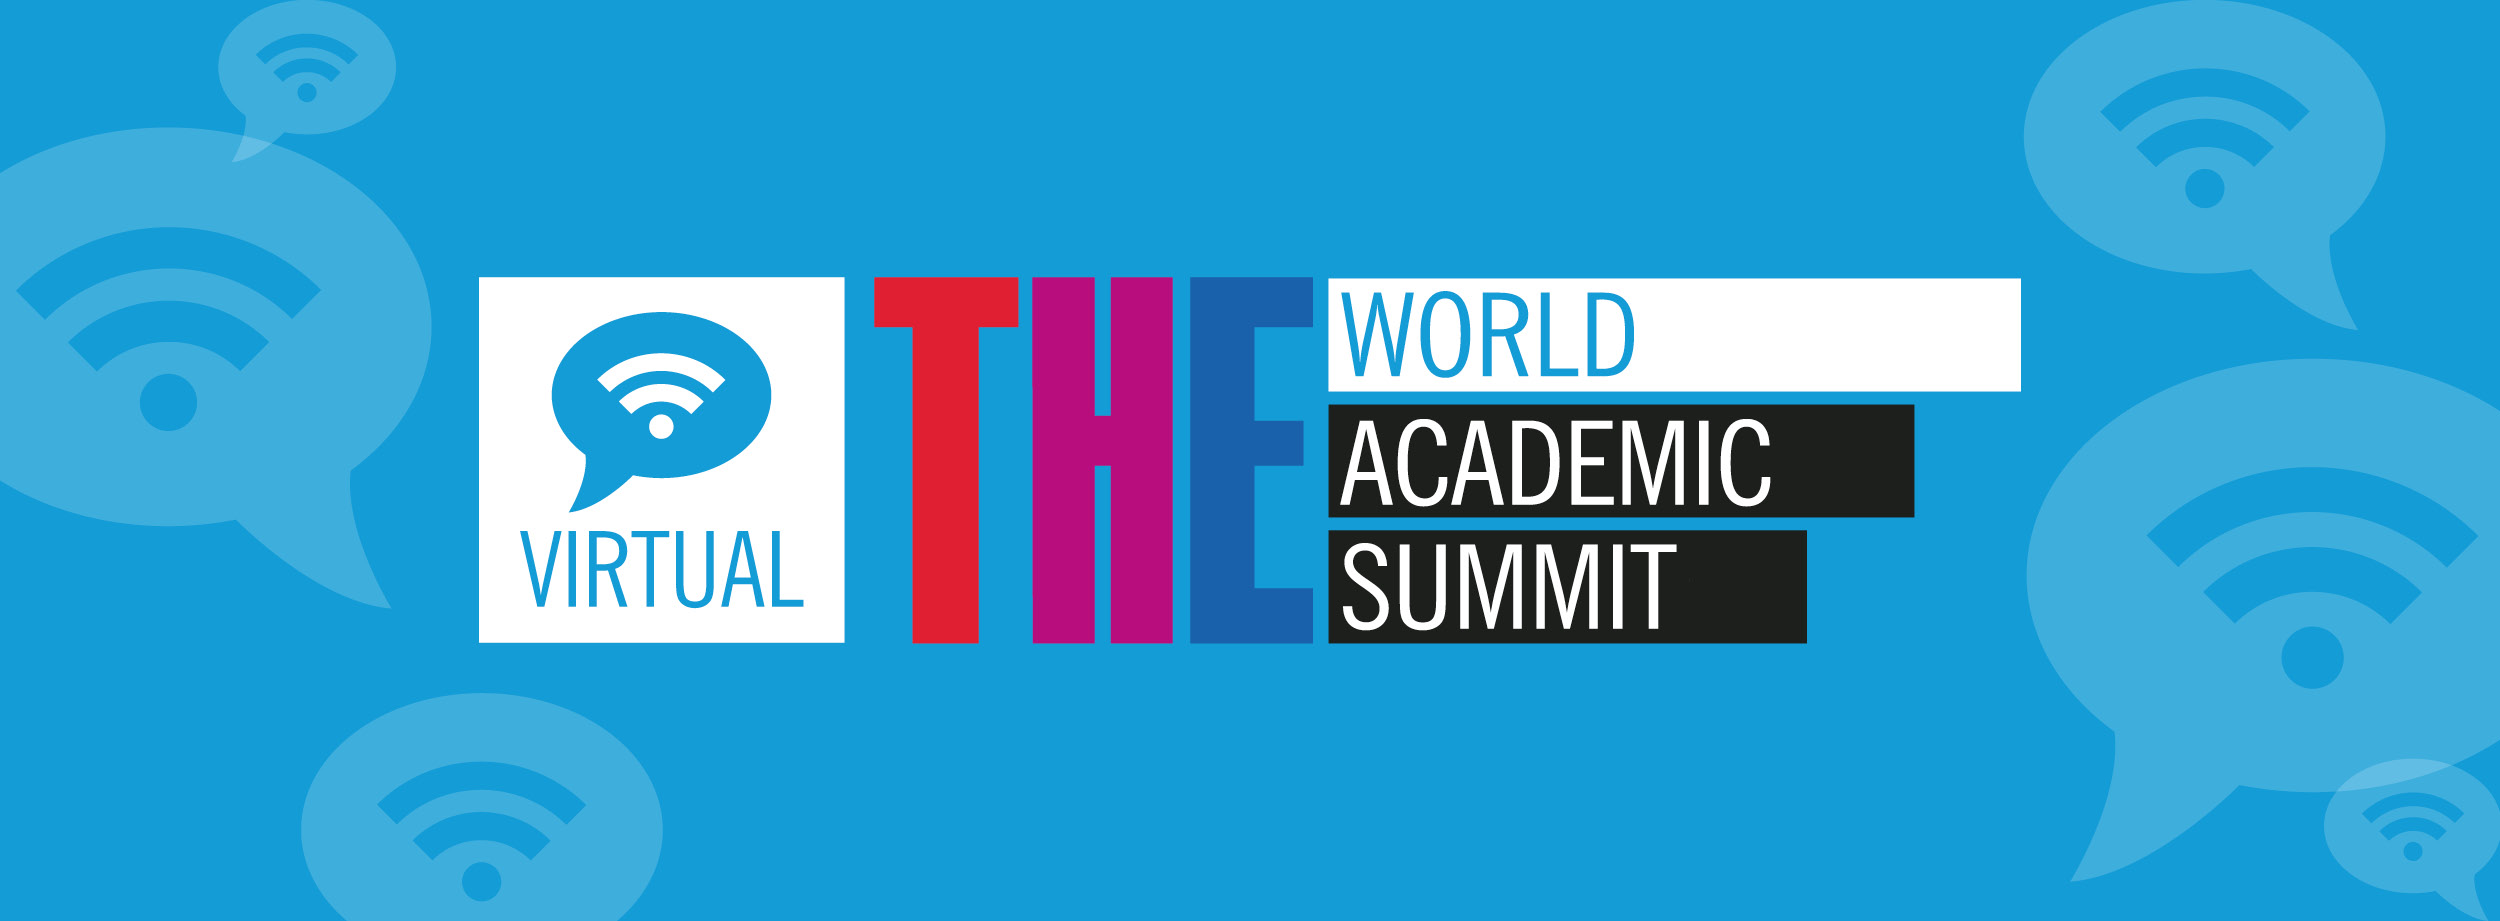 World Academic Summit Times Higher Education The 2607